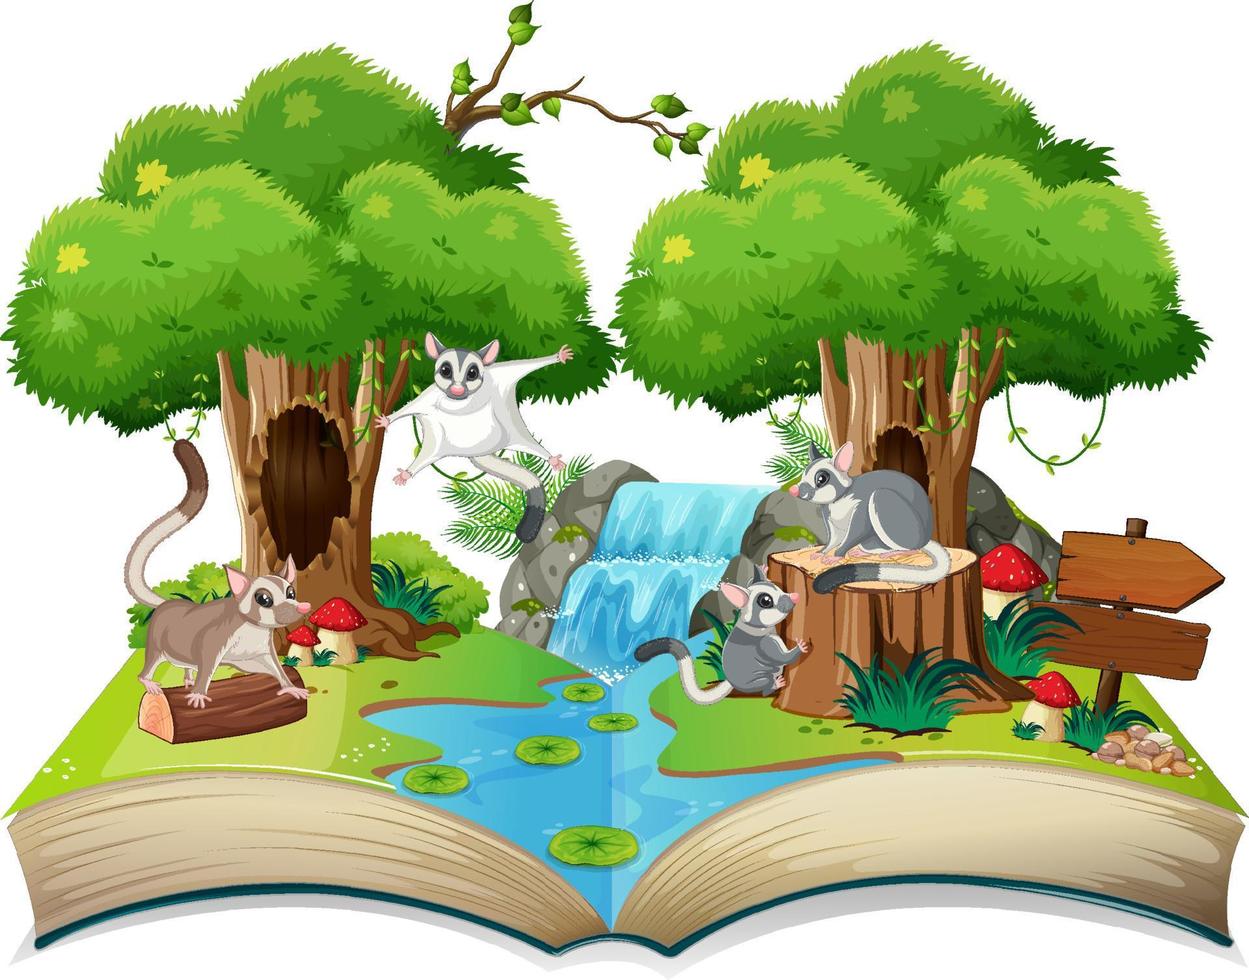 Book with sugar gliders in the park vector